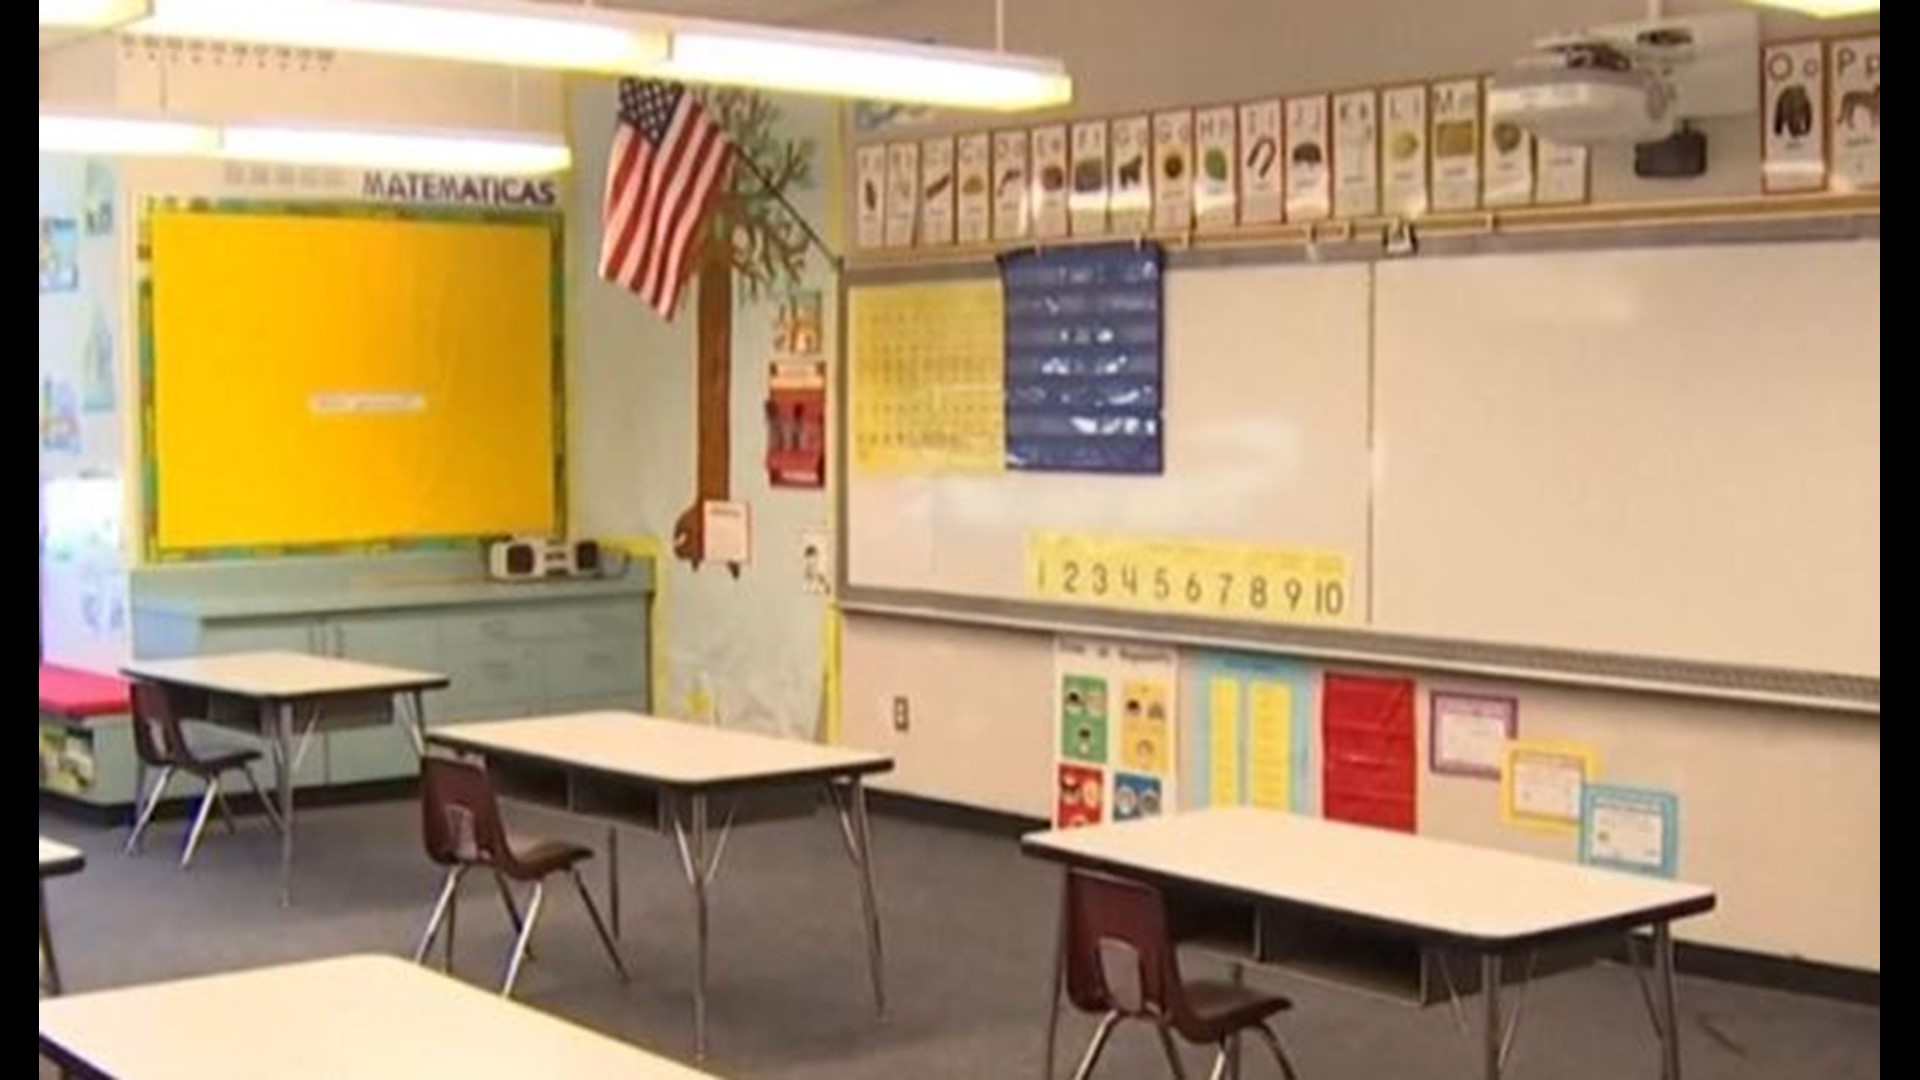 The Maine Department of Education announced Wednesday more than $2M in funding for schools as part of the Rethinking Remote Education Ventures project.